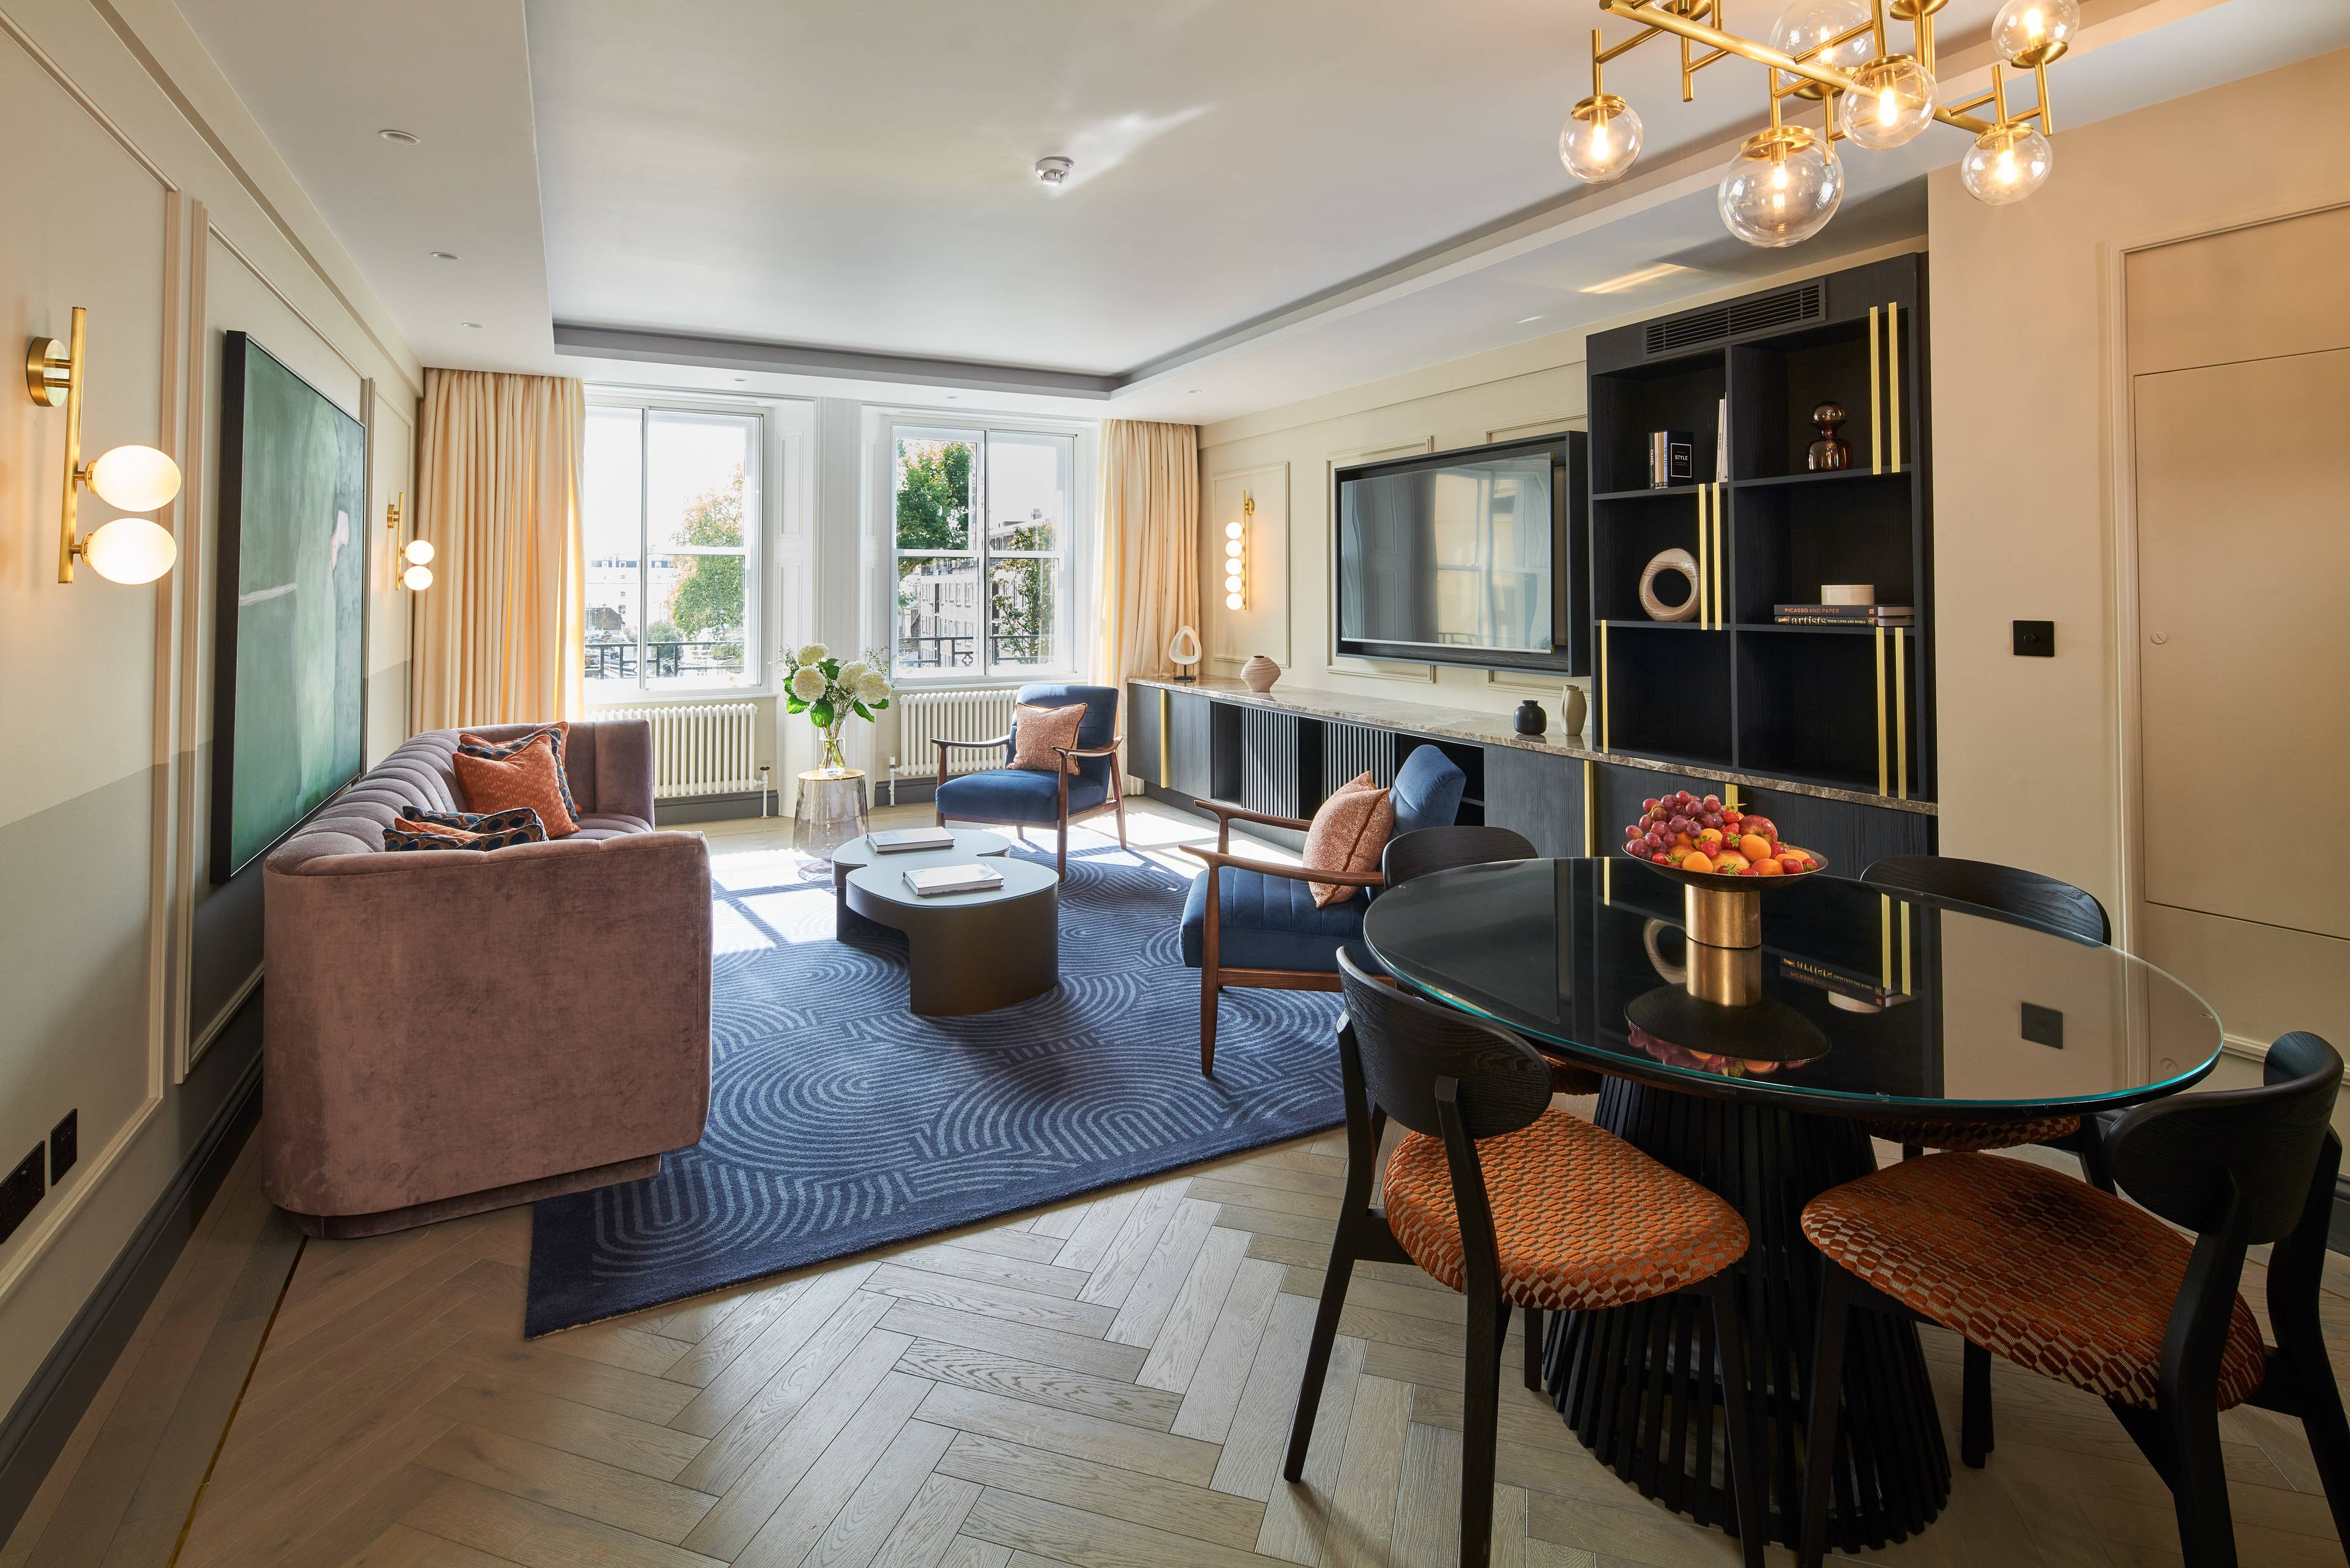 Newly Refurbished Deluxe Second-Floor Two-Bedroom Serviced Apartment in a Palatial Kensington Residence with Spectacular Hyde Park Views and Luxury Amenities